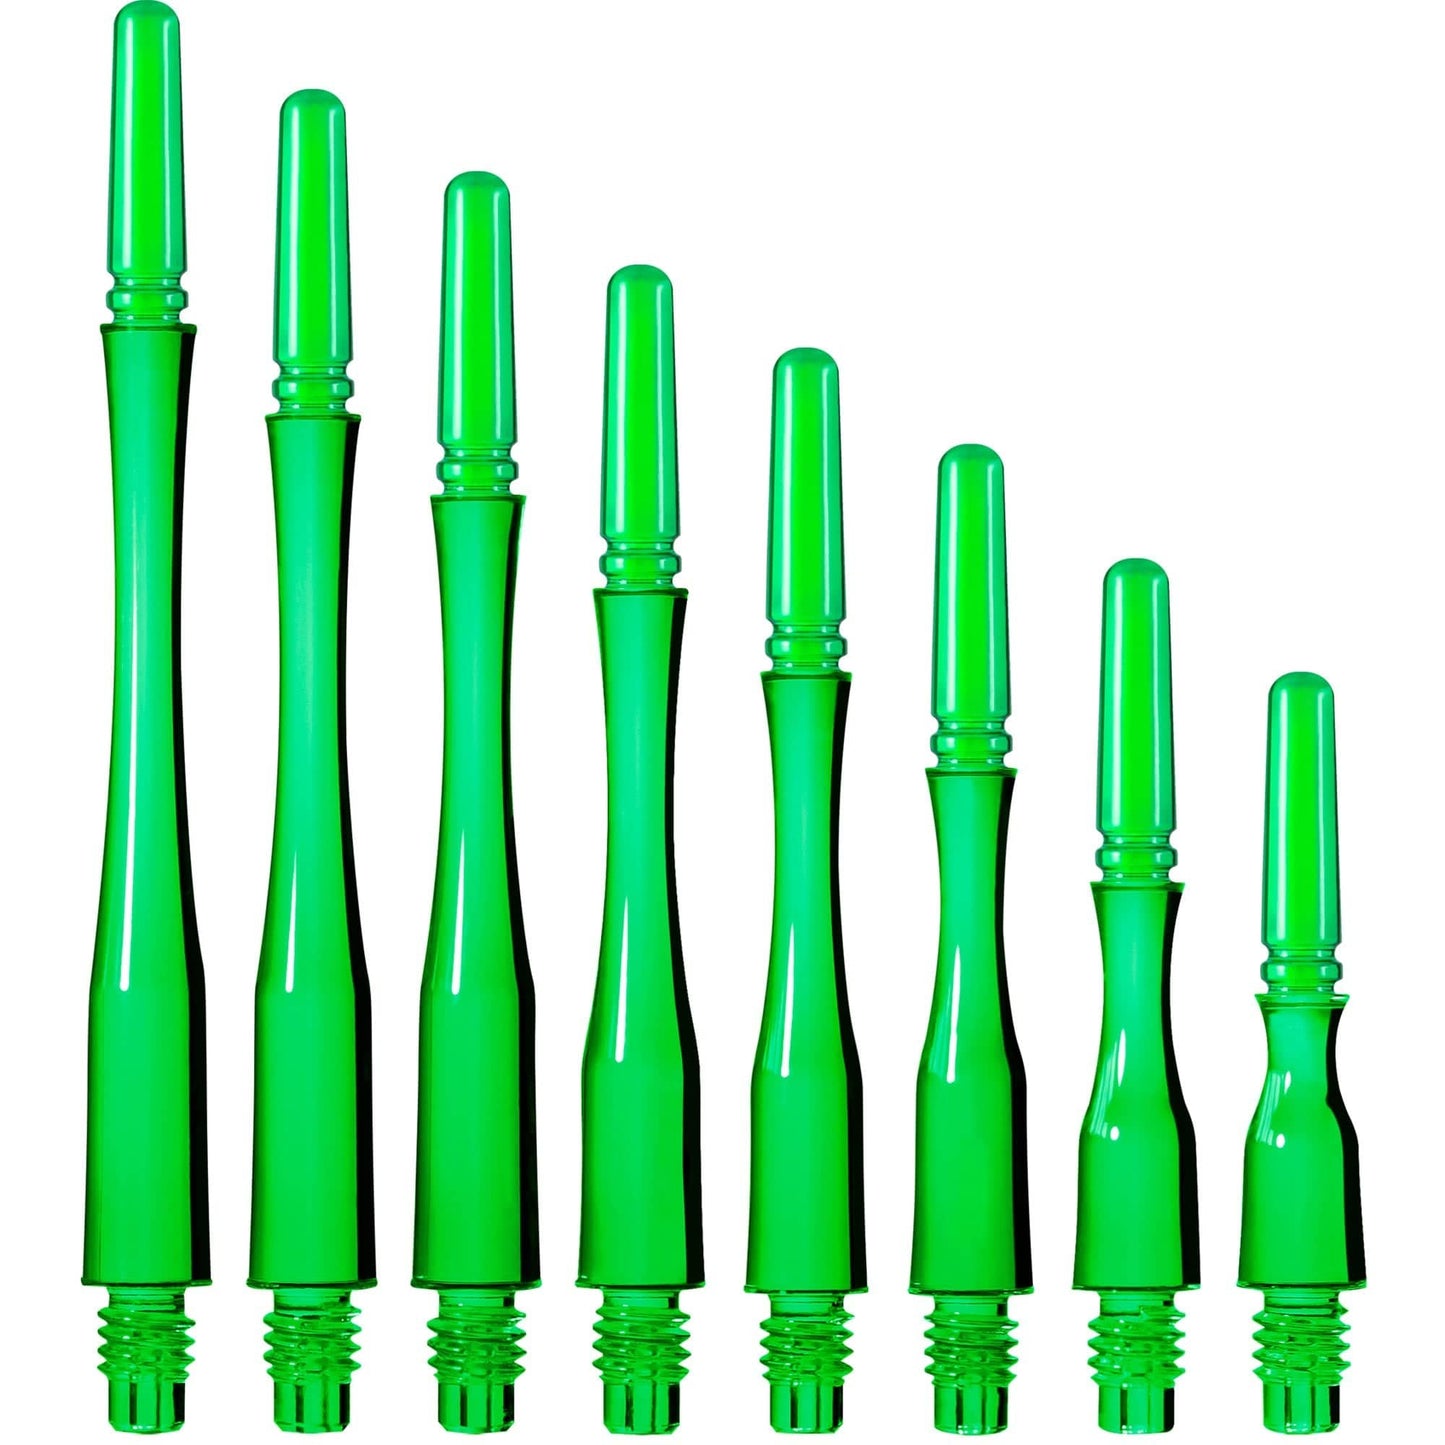 Cosmo Fit Shaft Gear - Spinning - Hybrid - Clear Green Cosmo Size 1 - 13mm